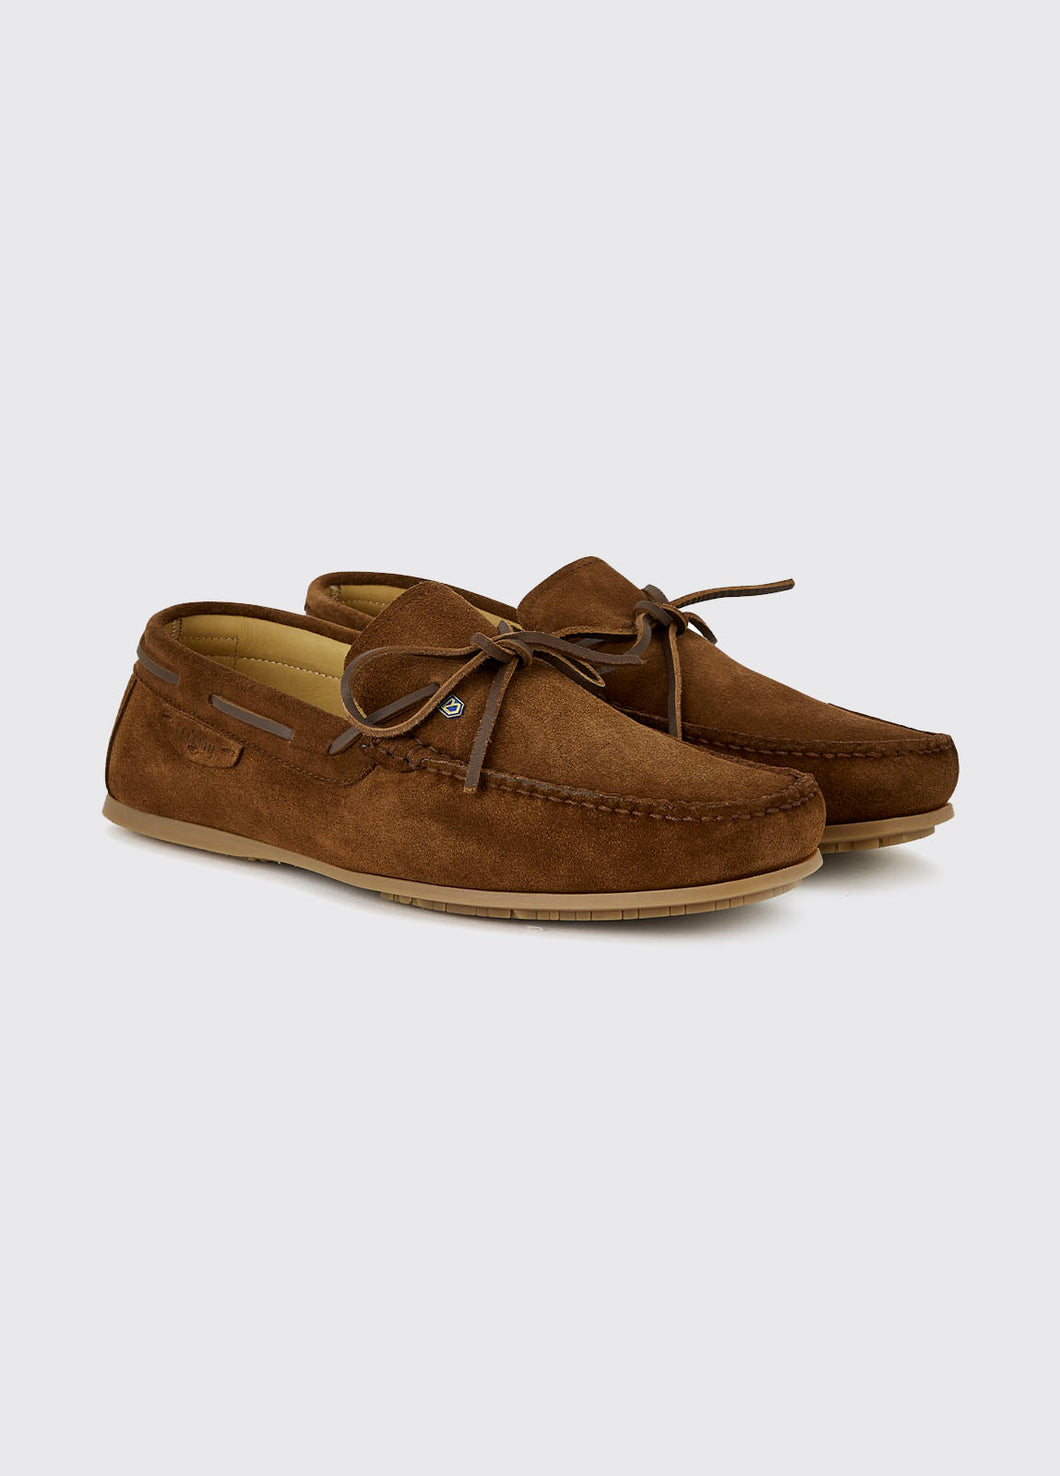 Dubarry - Shearwater Loafer - Tobacco